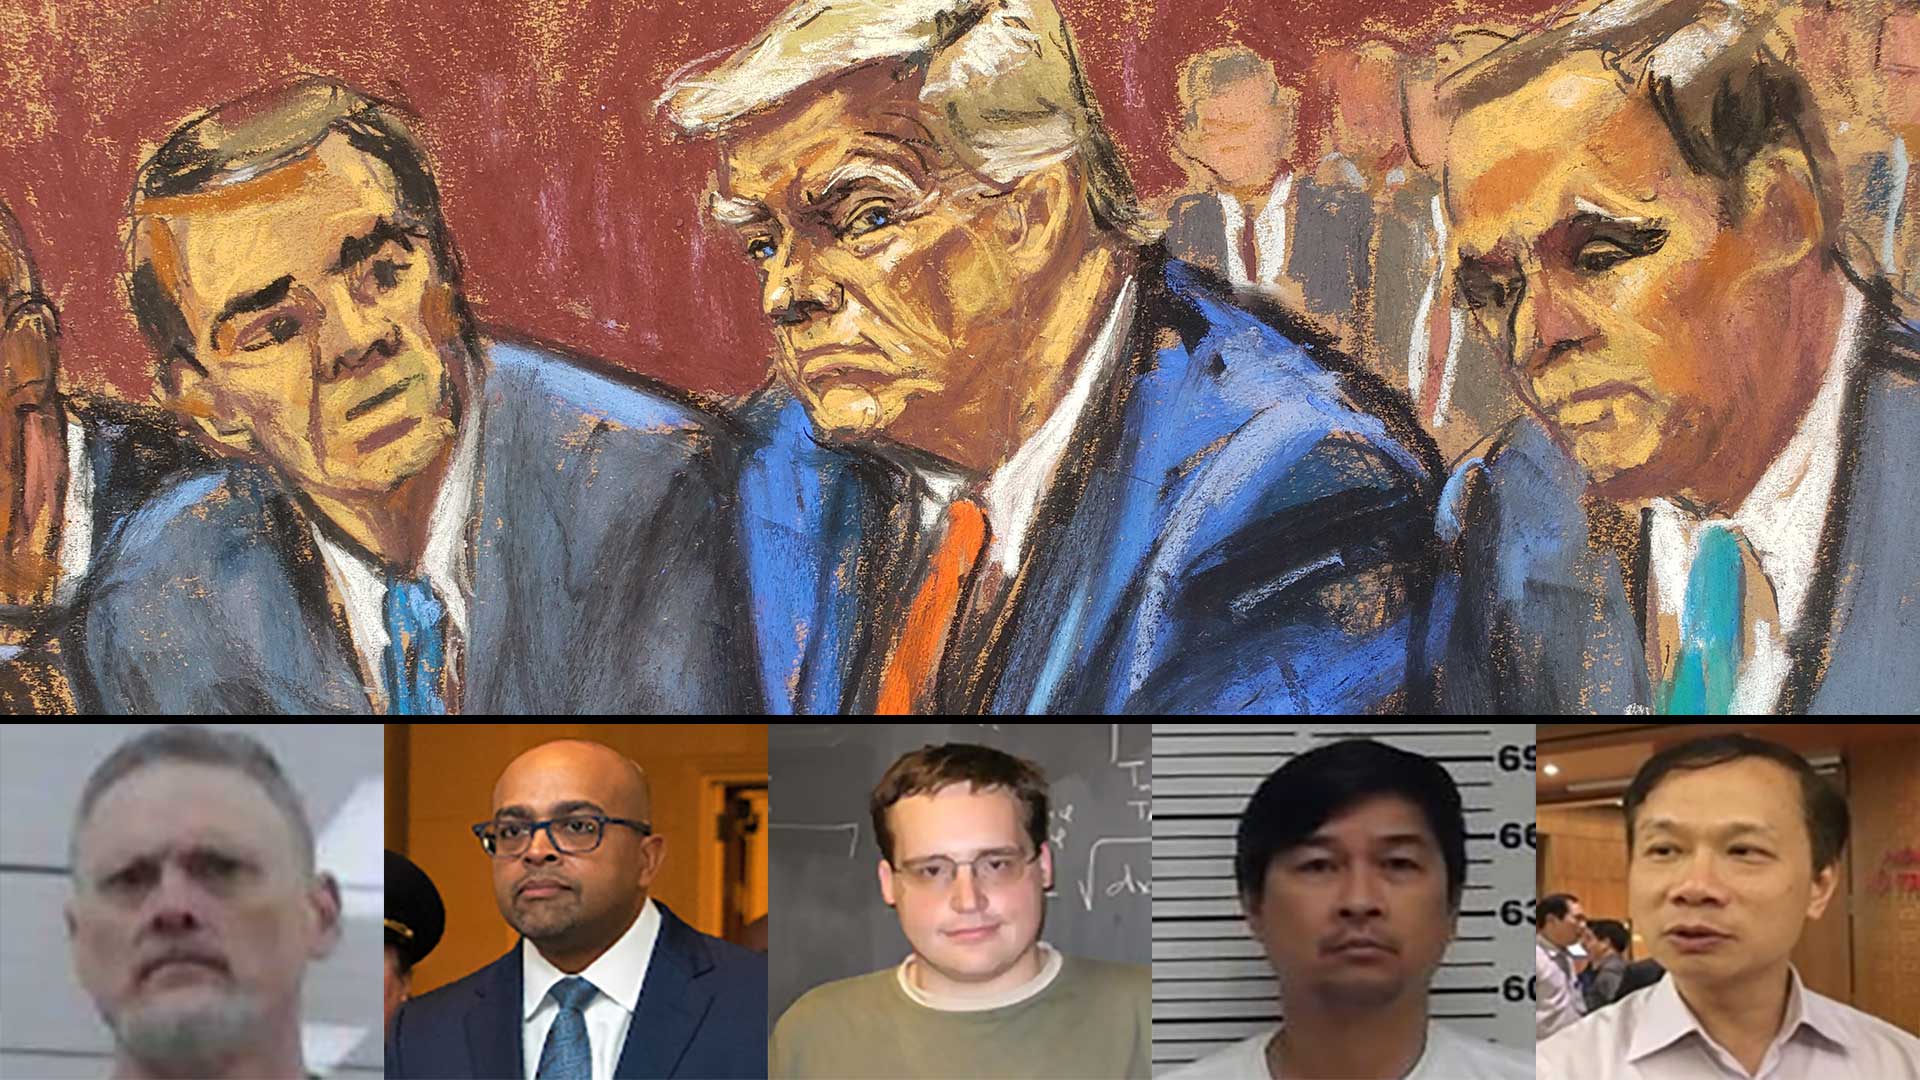 Above: Rendering of Donald Trump in court for his classified document indictment. Below: Photos from CDSE Case Study Library of people convicted of retaining classified documents.